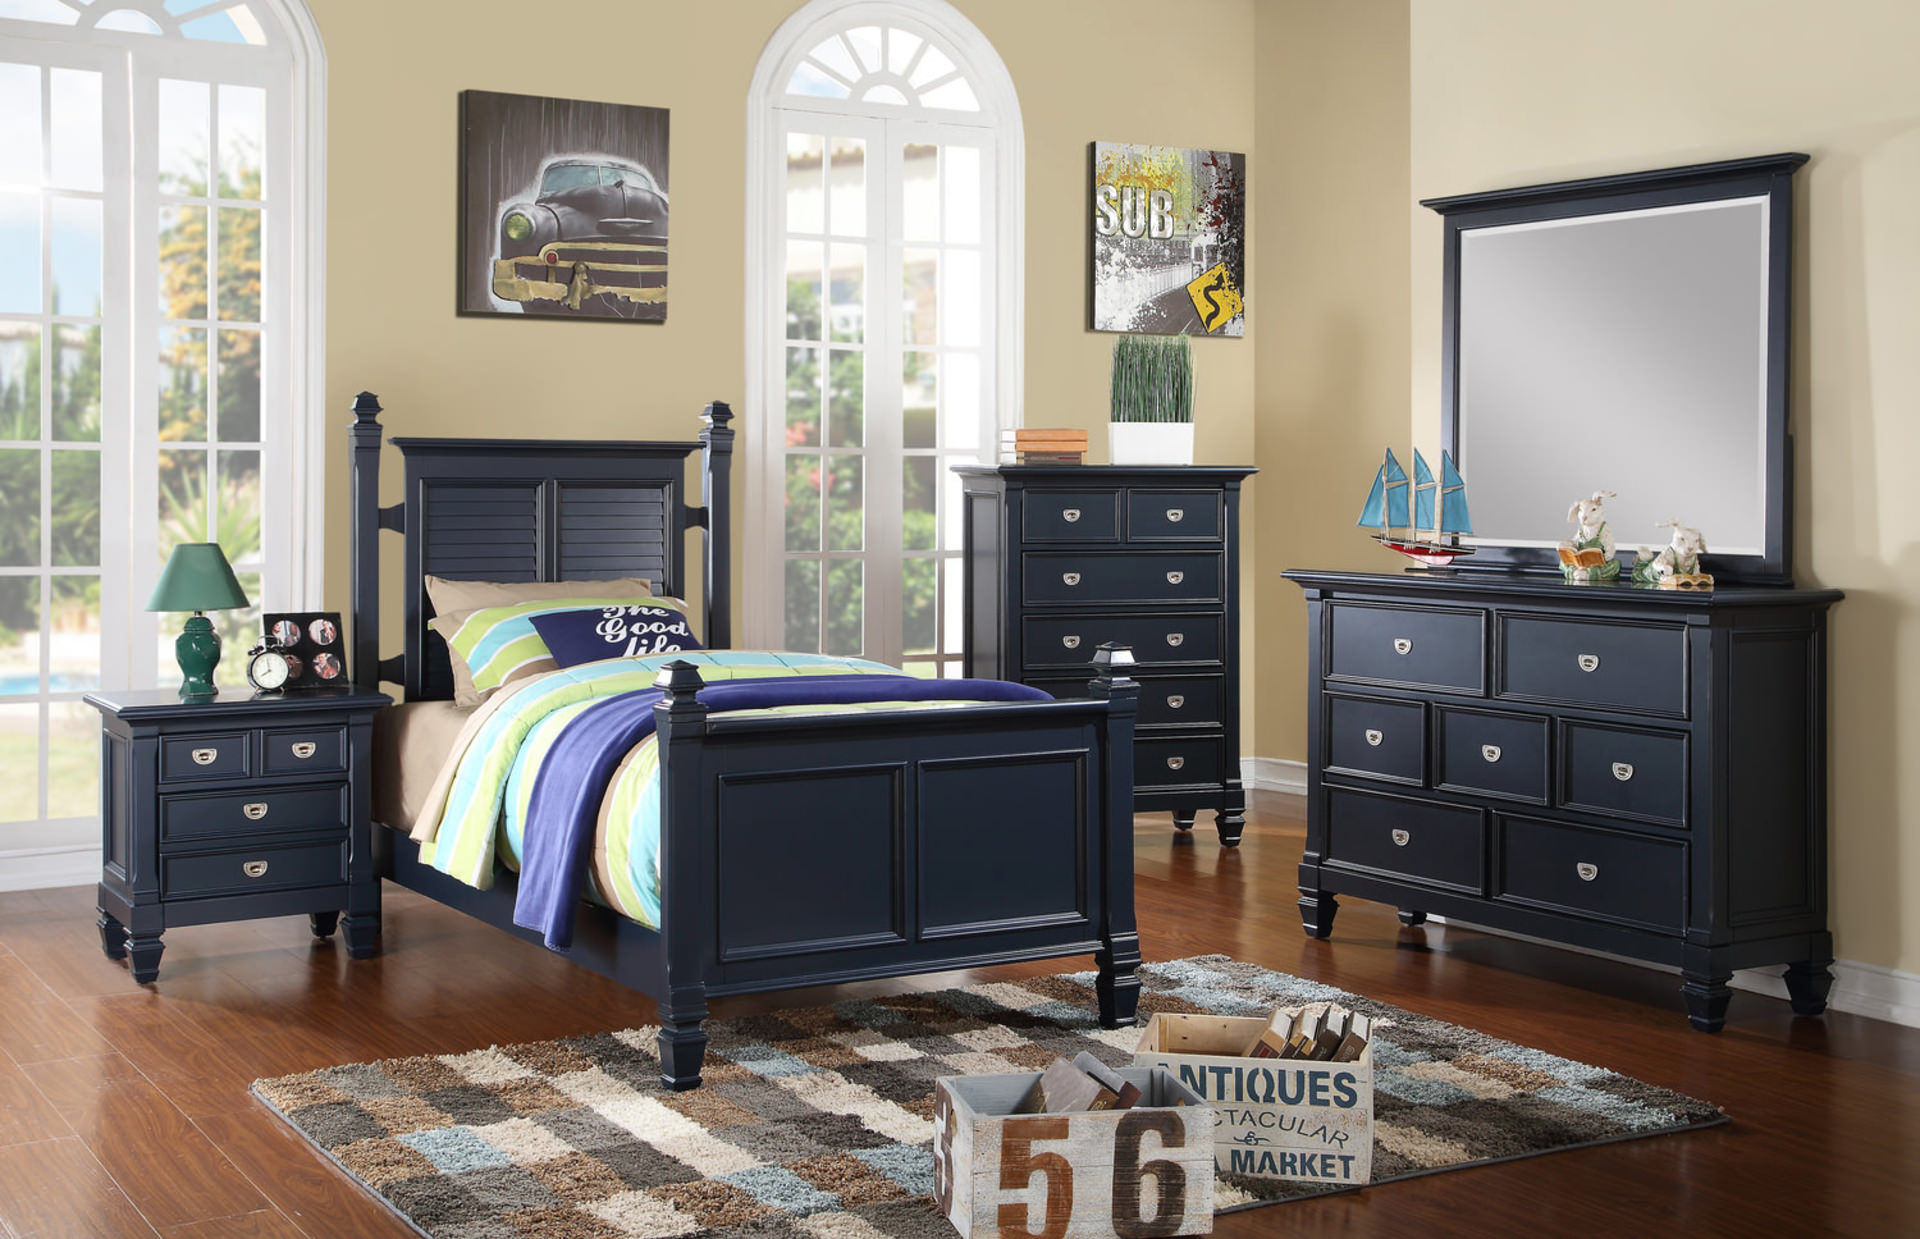 navy is the new neutral - design bloghom furniture